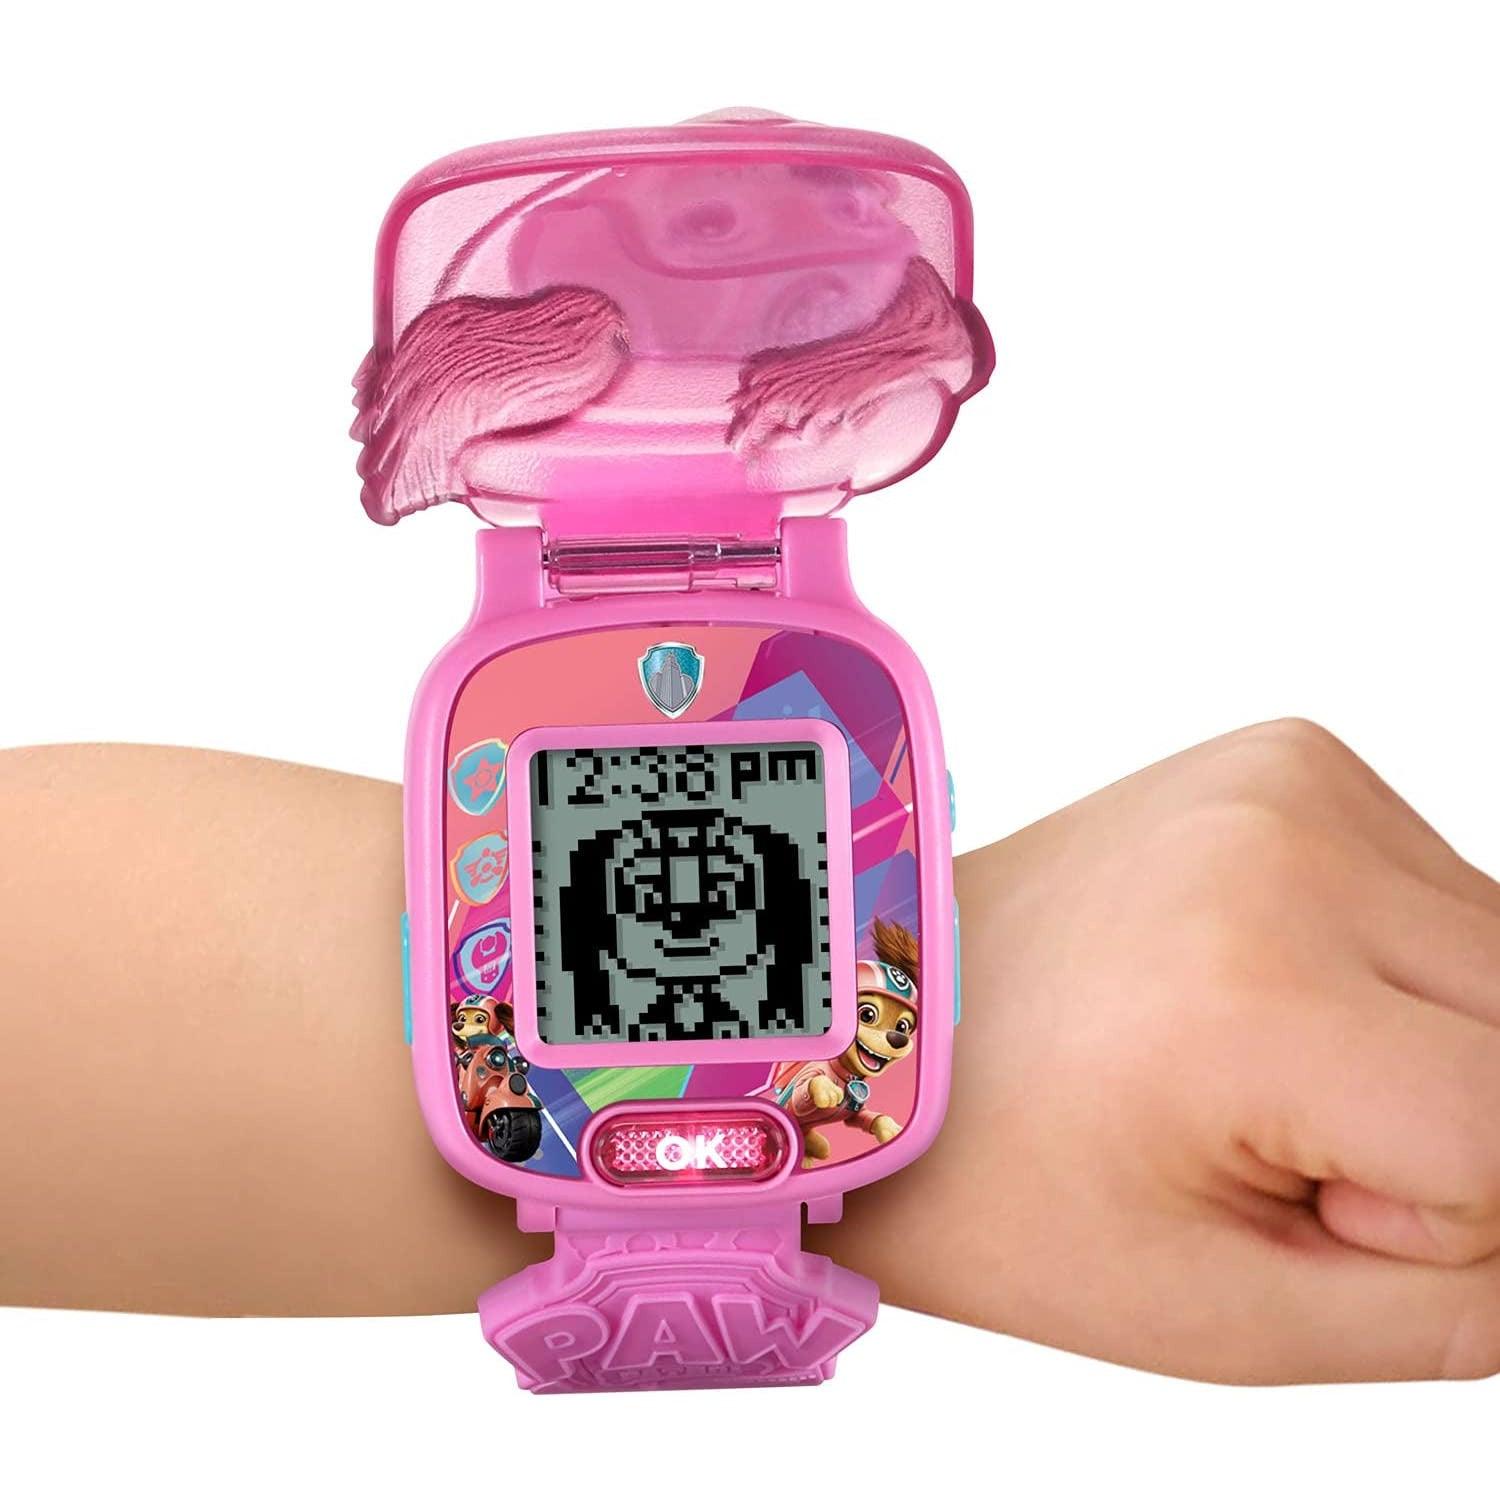 VTech PAW Patrol - The Movie: Learning Watch, Liberty - BumbleToys - 2-4 Years, 5-7 Years, Kids, Paw Patrol, Pre-Order, Watch